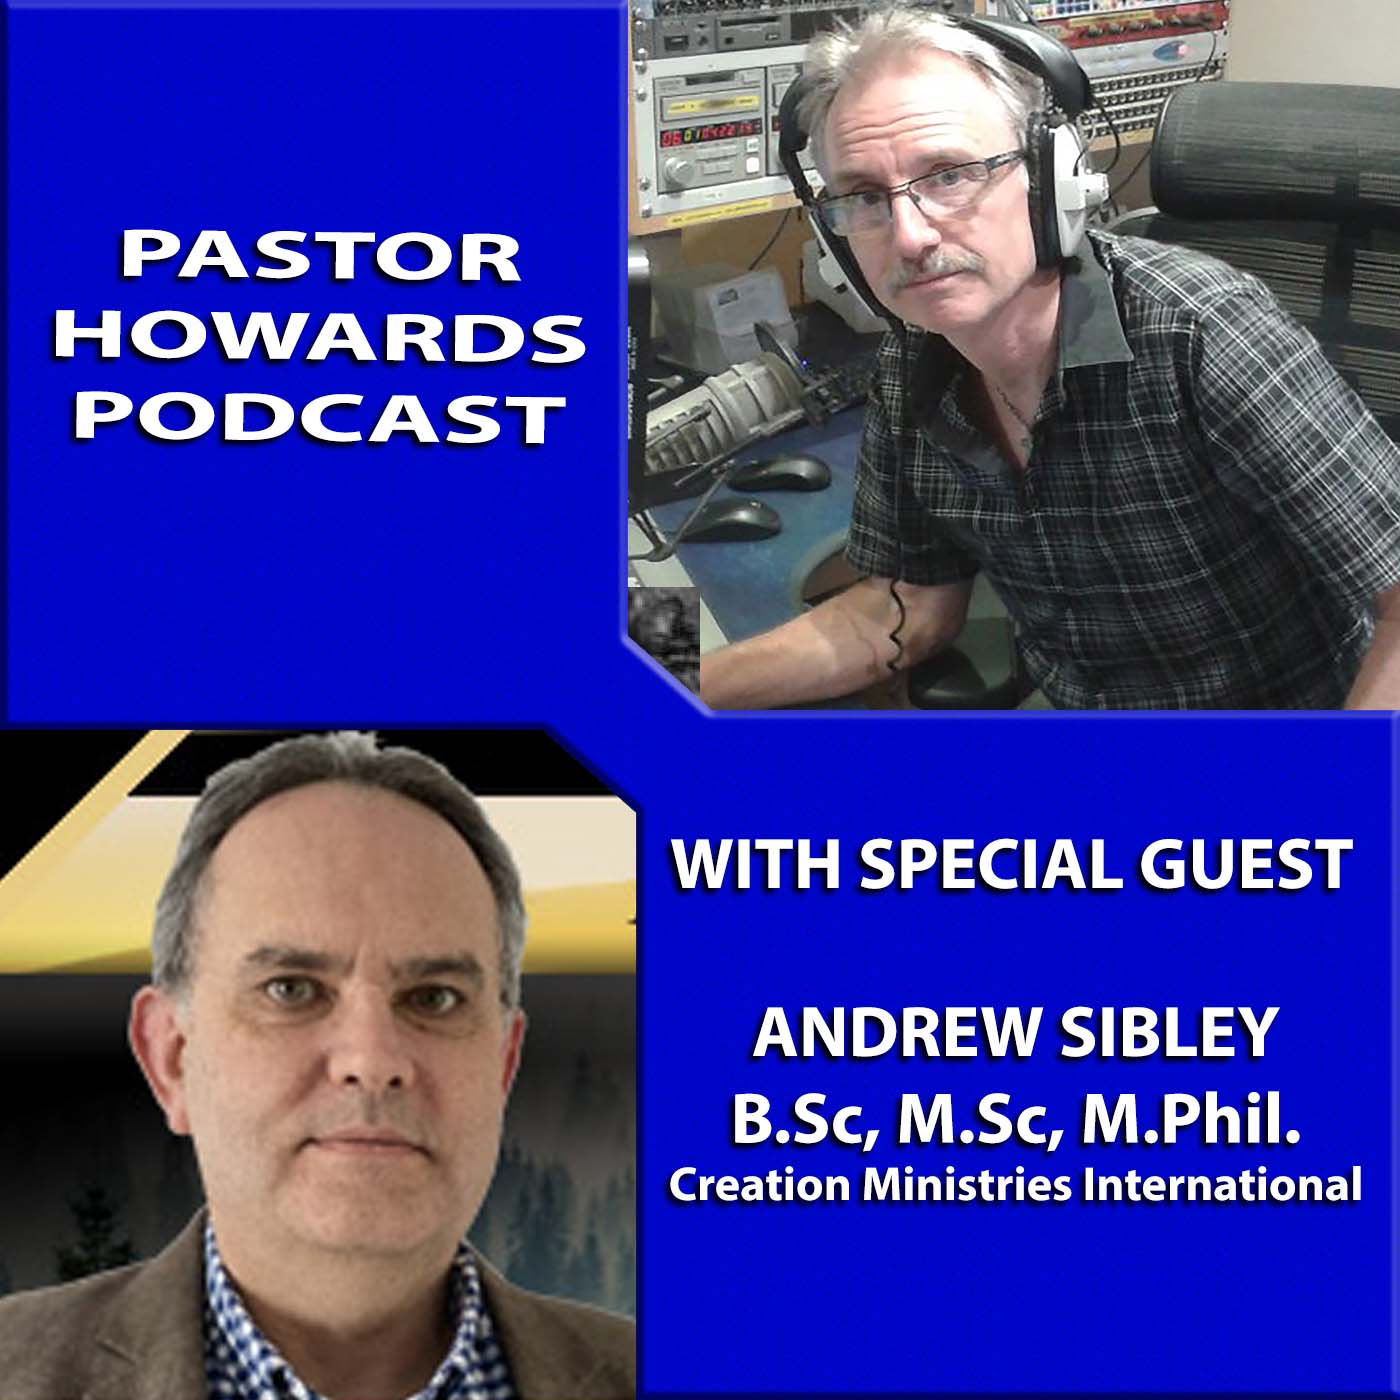 2REVS ANDREW SIBLEY PODCAST